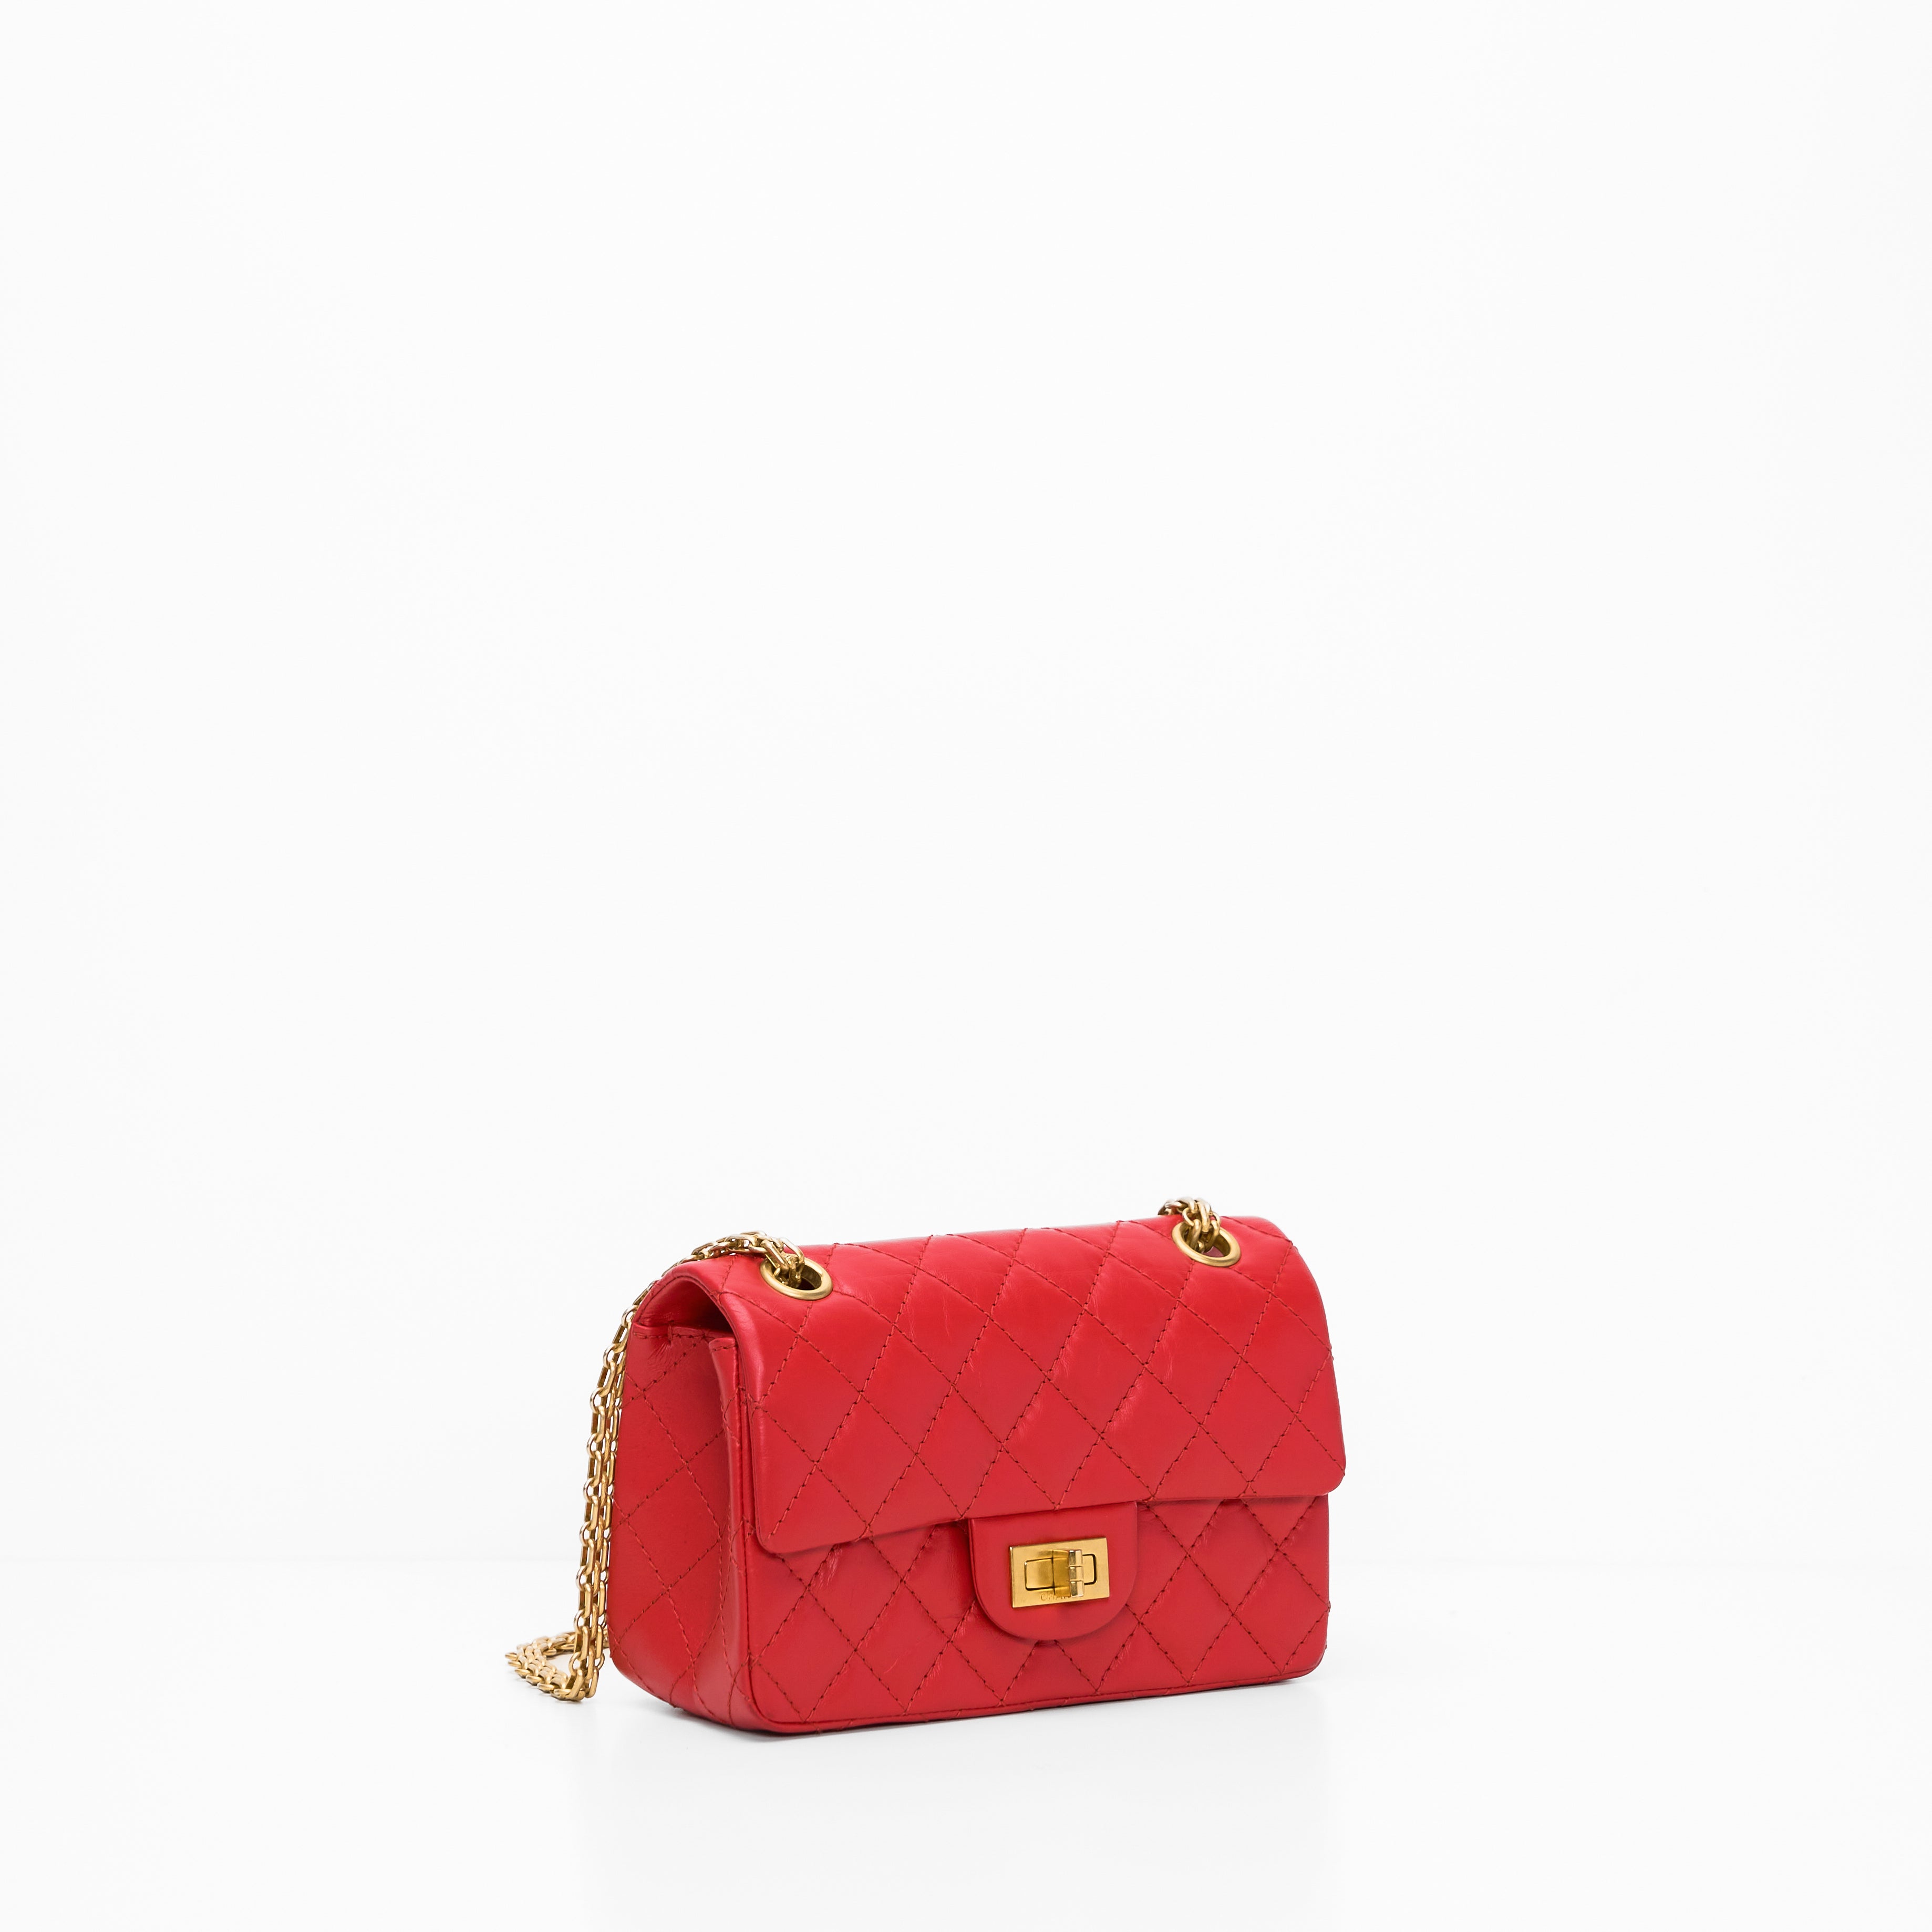 CHANEL 2.55 MINI IN RED